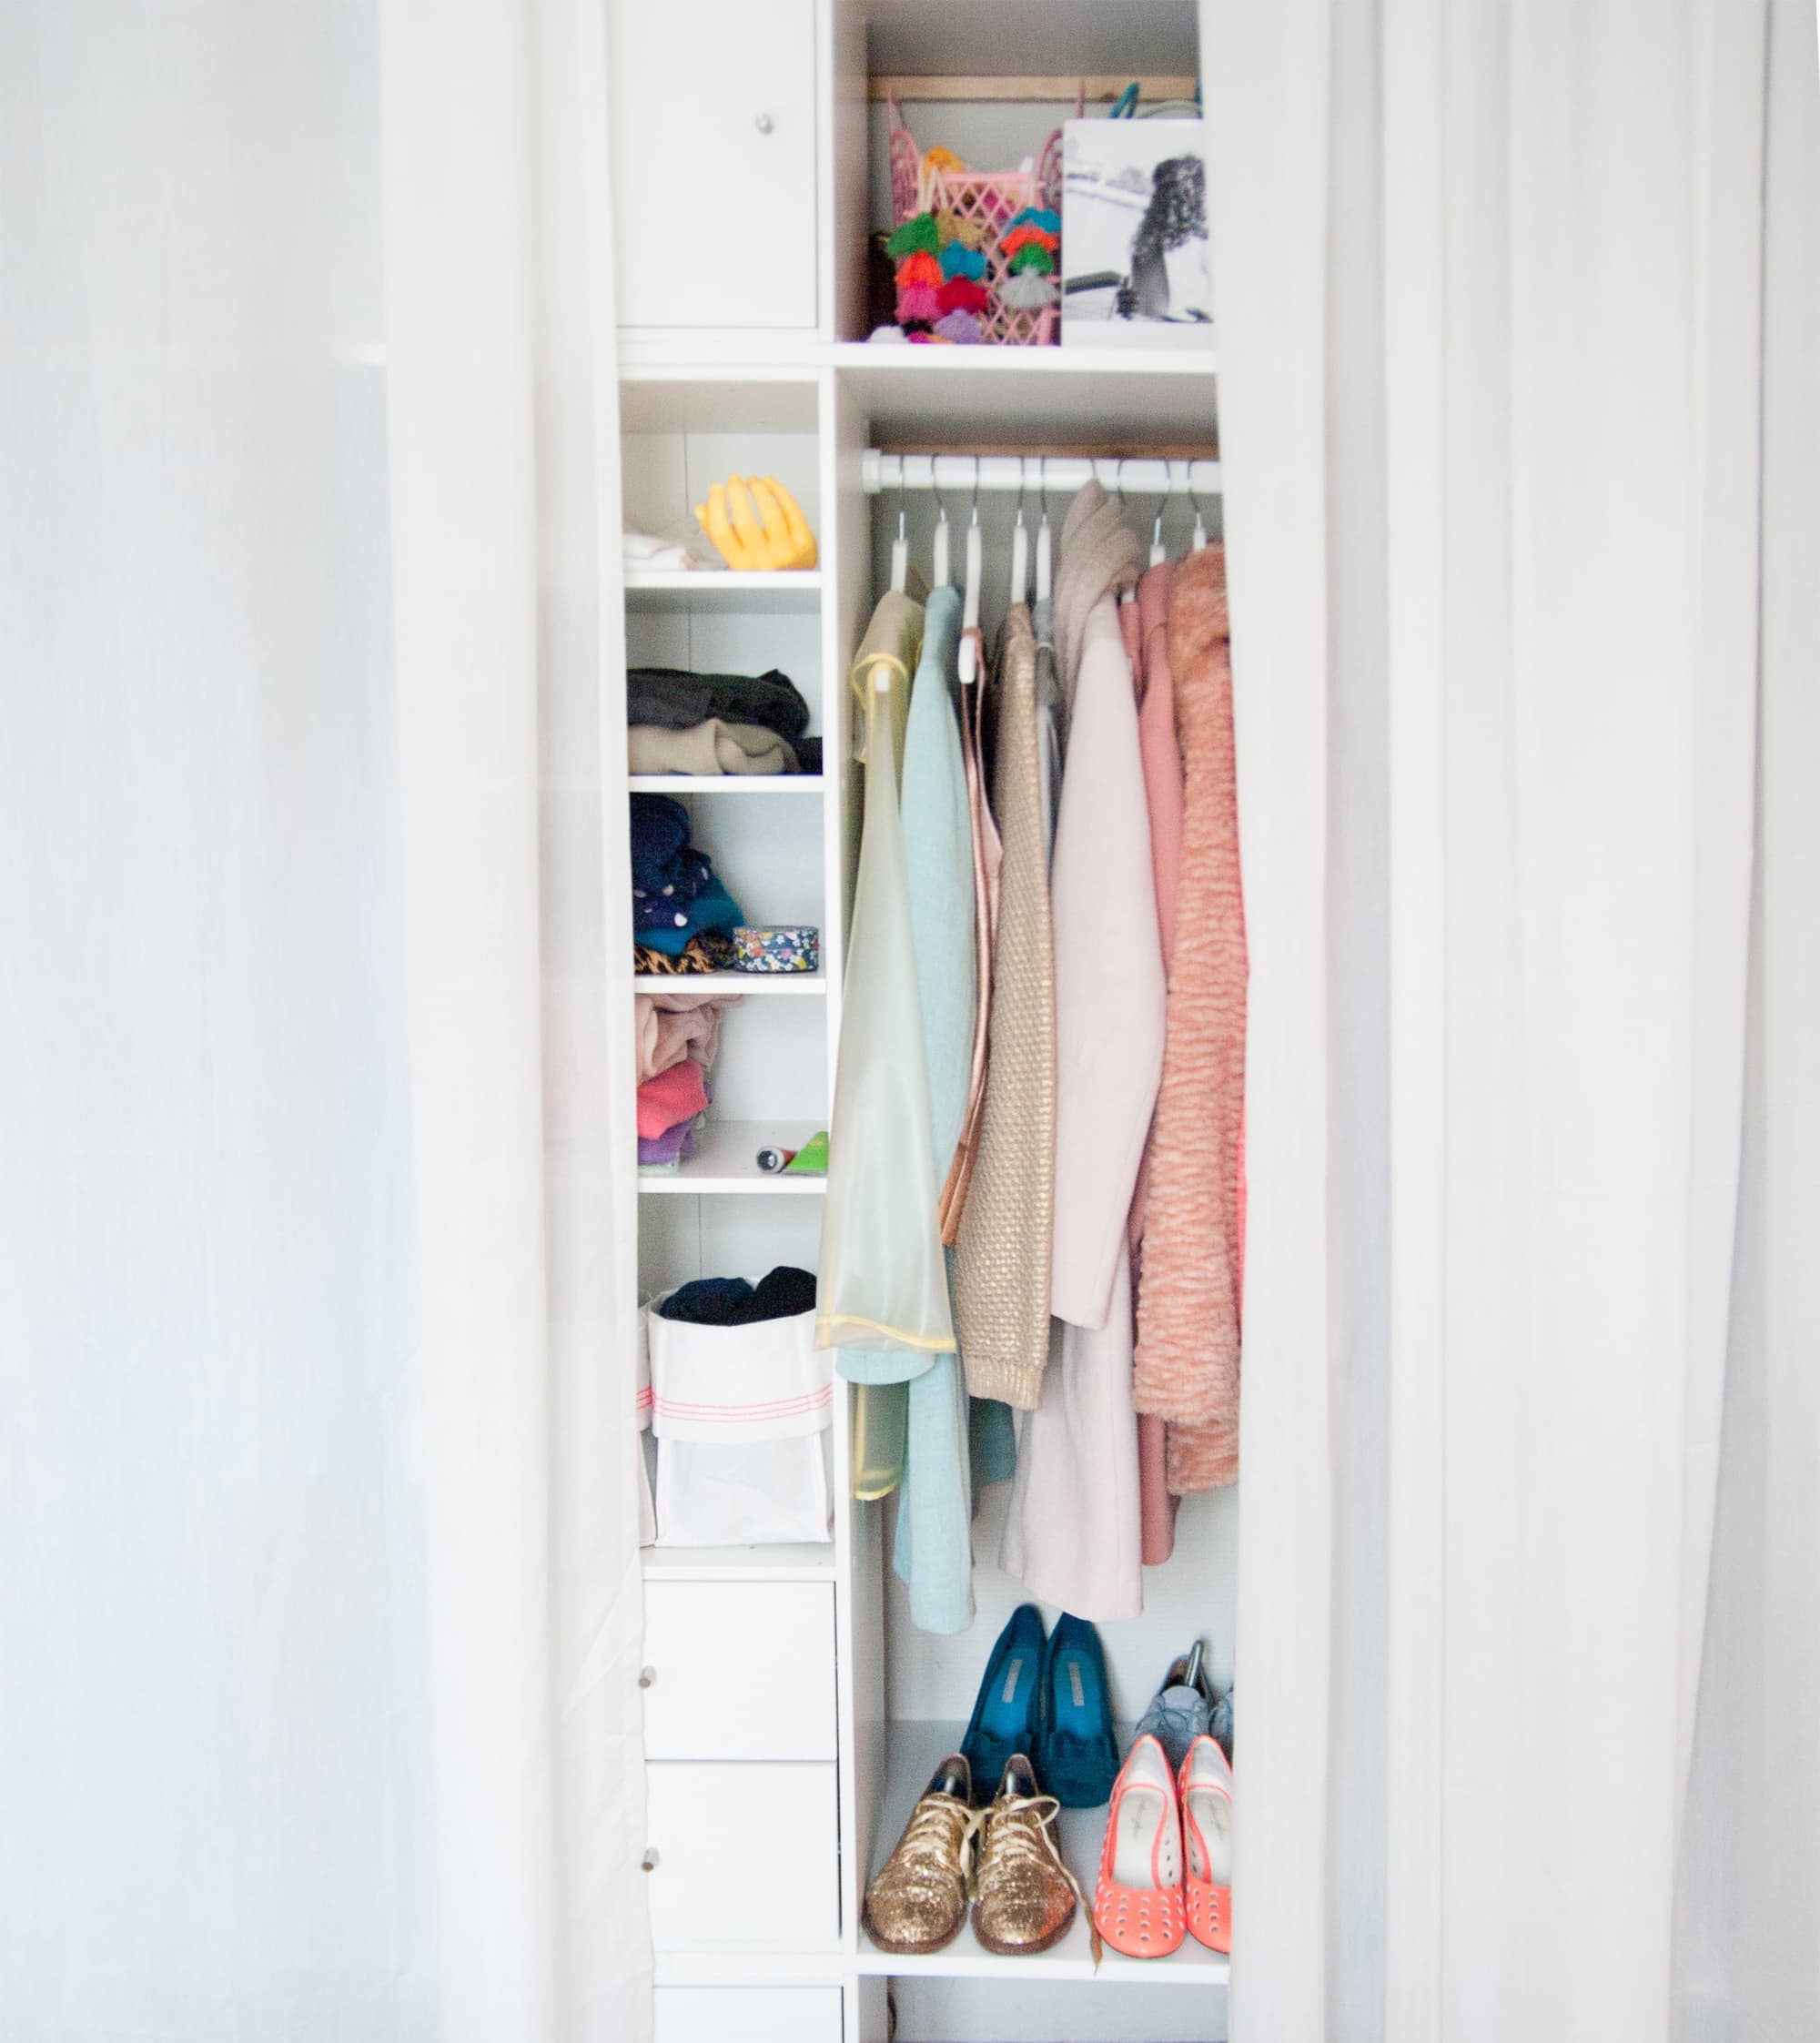 How To Organize A Small Closet on a Budget, According to Pinterest Experts